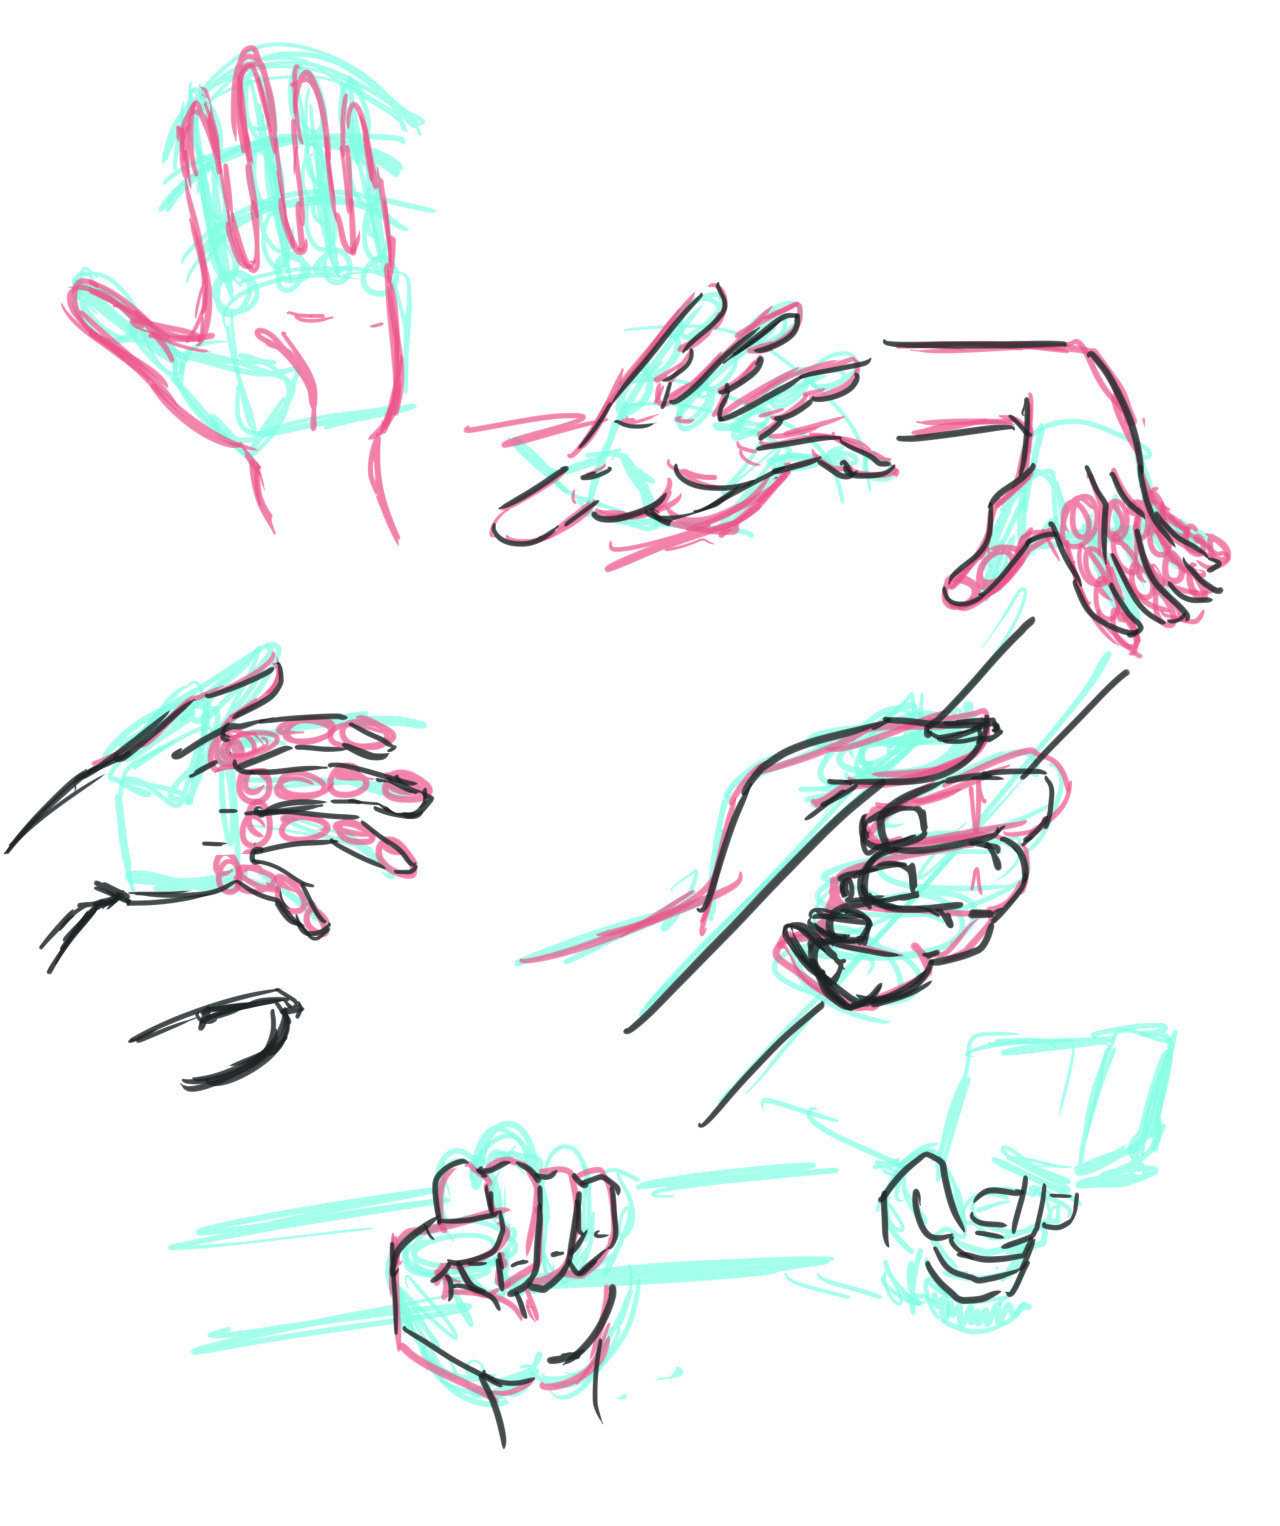 Draw Expressive Hand Poses from Imagination  Art Rocket